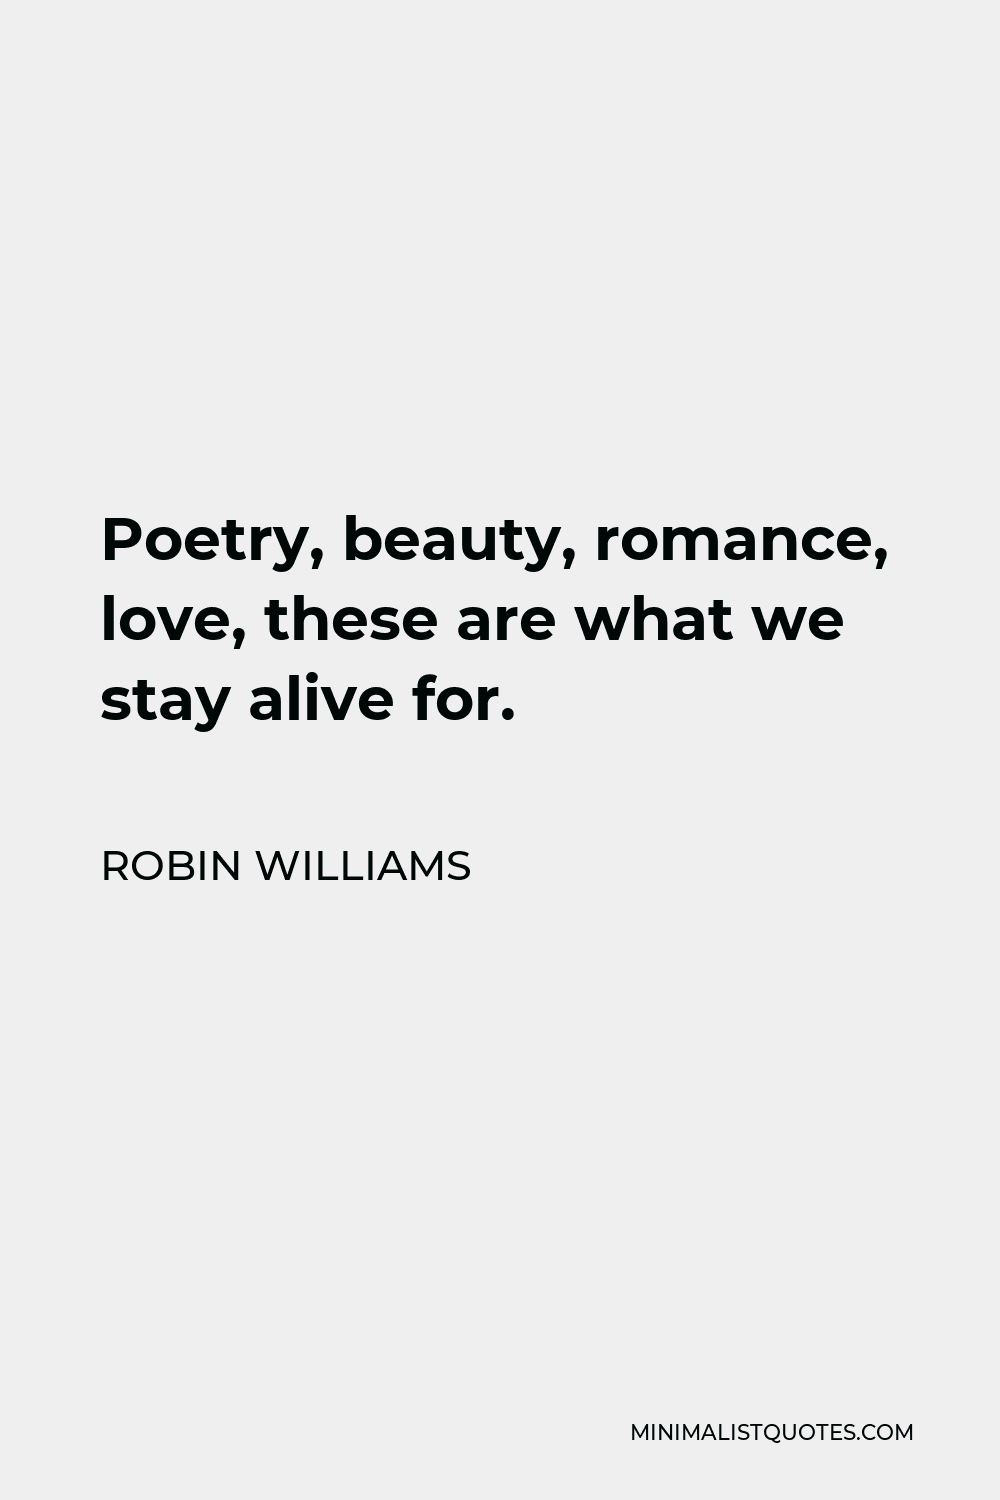 Robin Williams Quote: Poetry, beauty, romance, love, these are what we ...